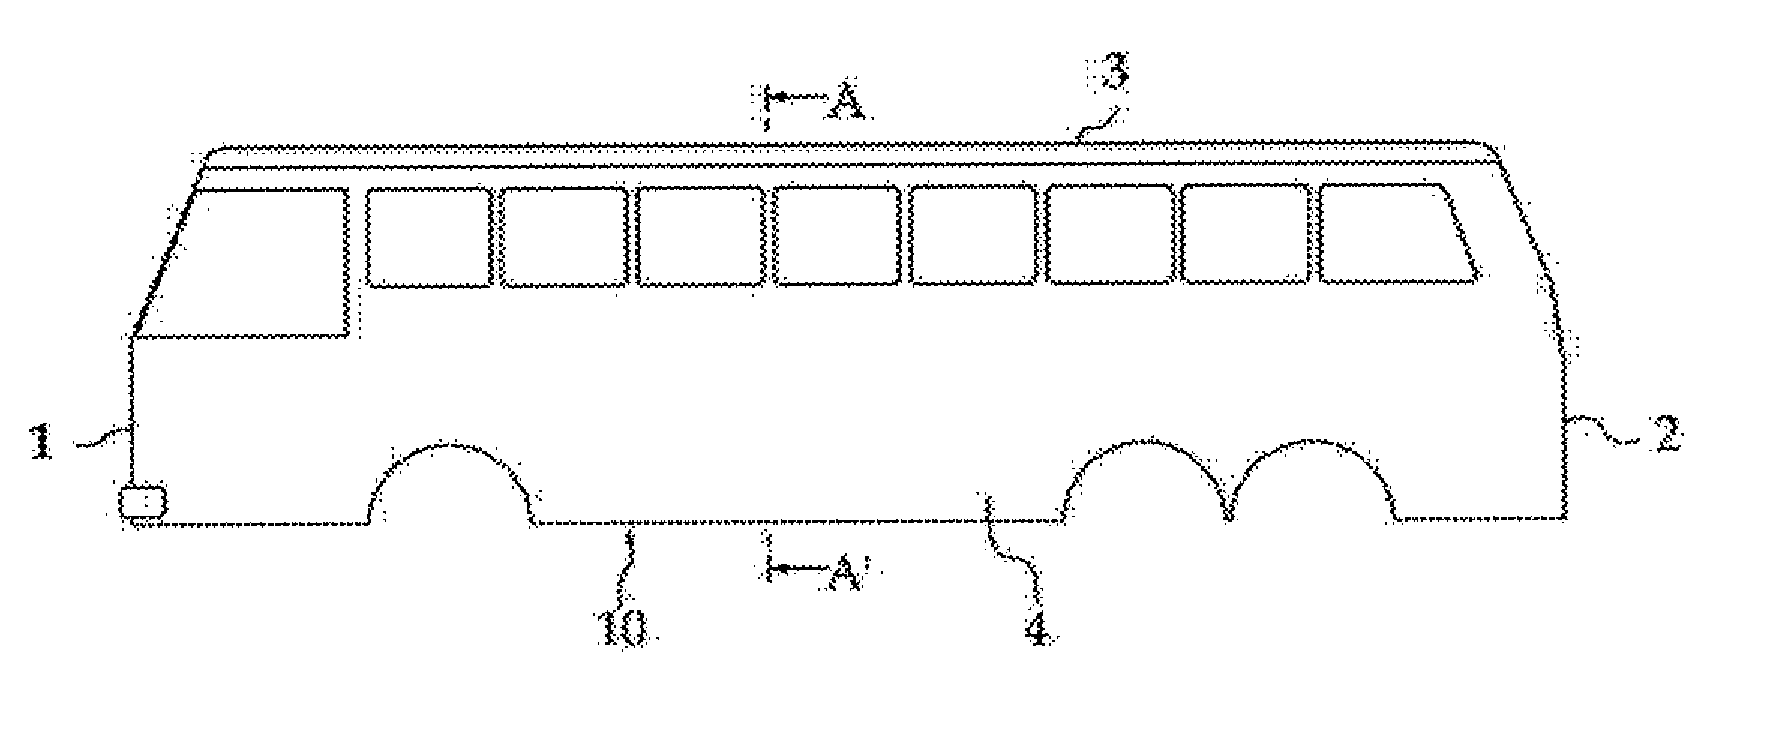 Integrated Composite-Material Vehicle Body for a Transportation Vehicle, and a Production Method Therefor